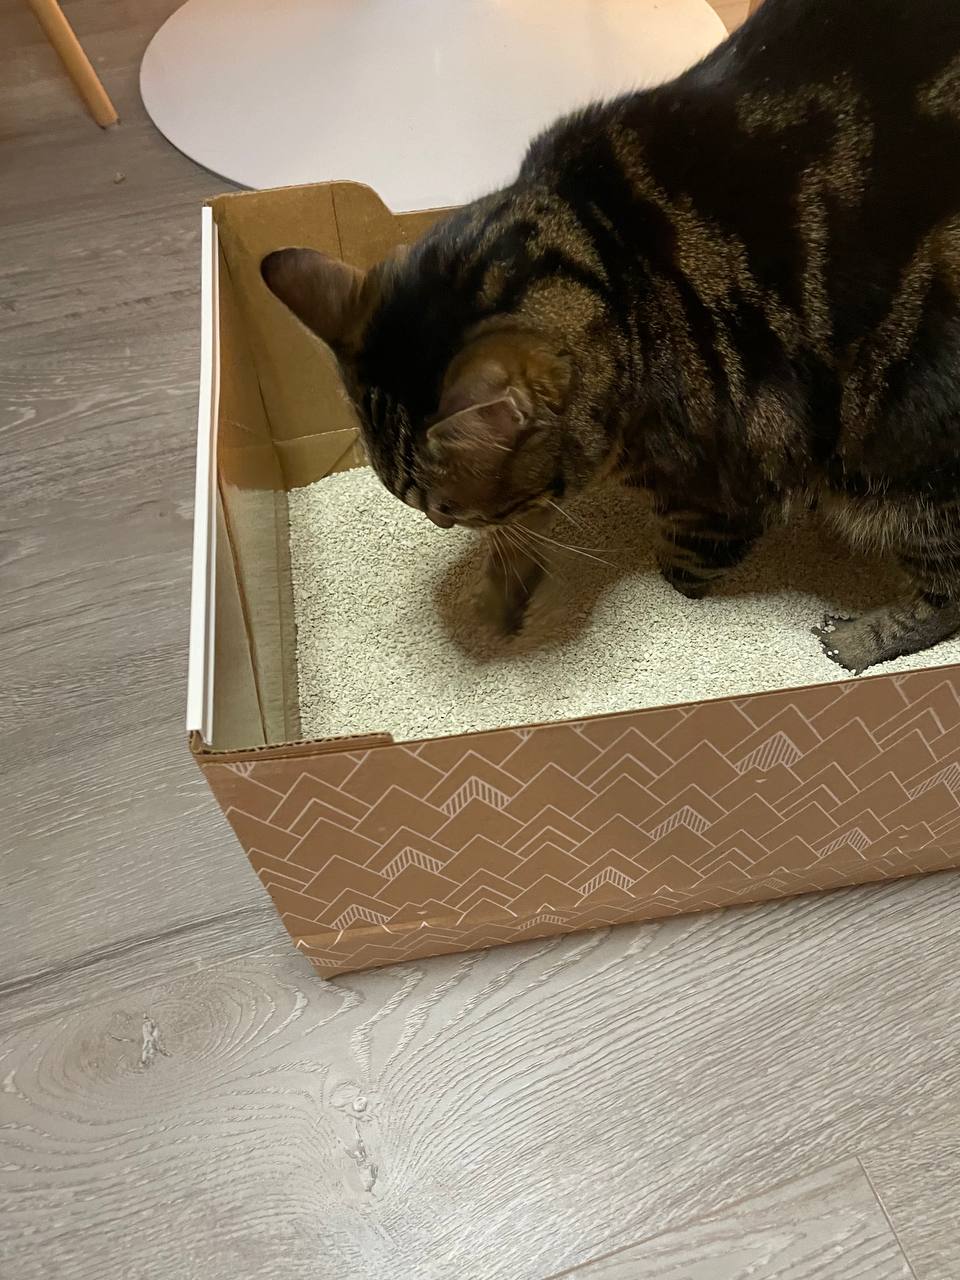 My cat is cleaning her pee in Kitty Poo Club litter box